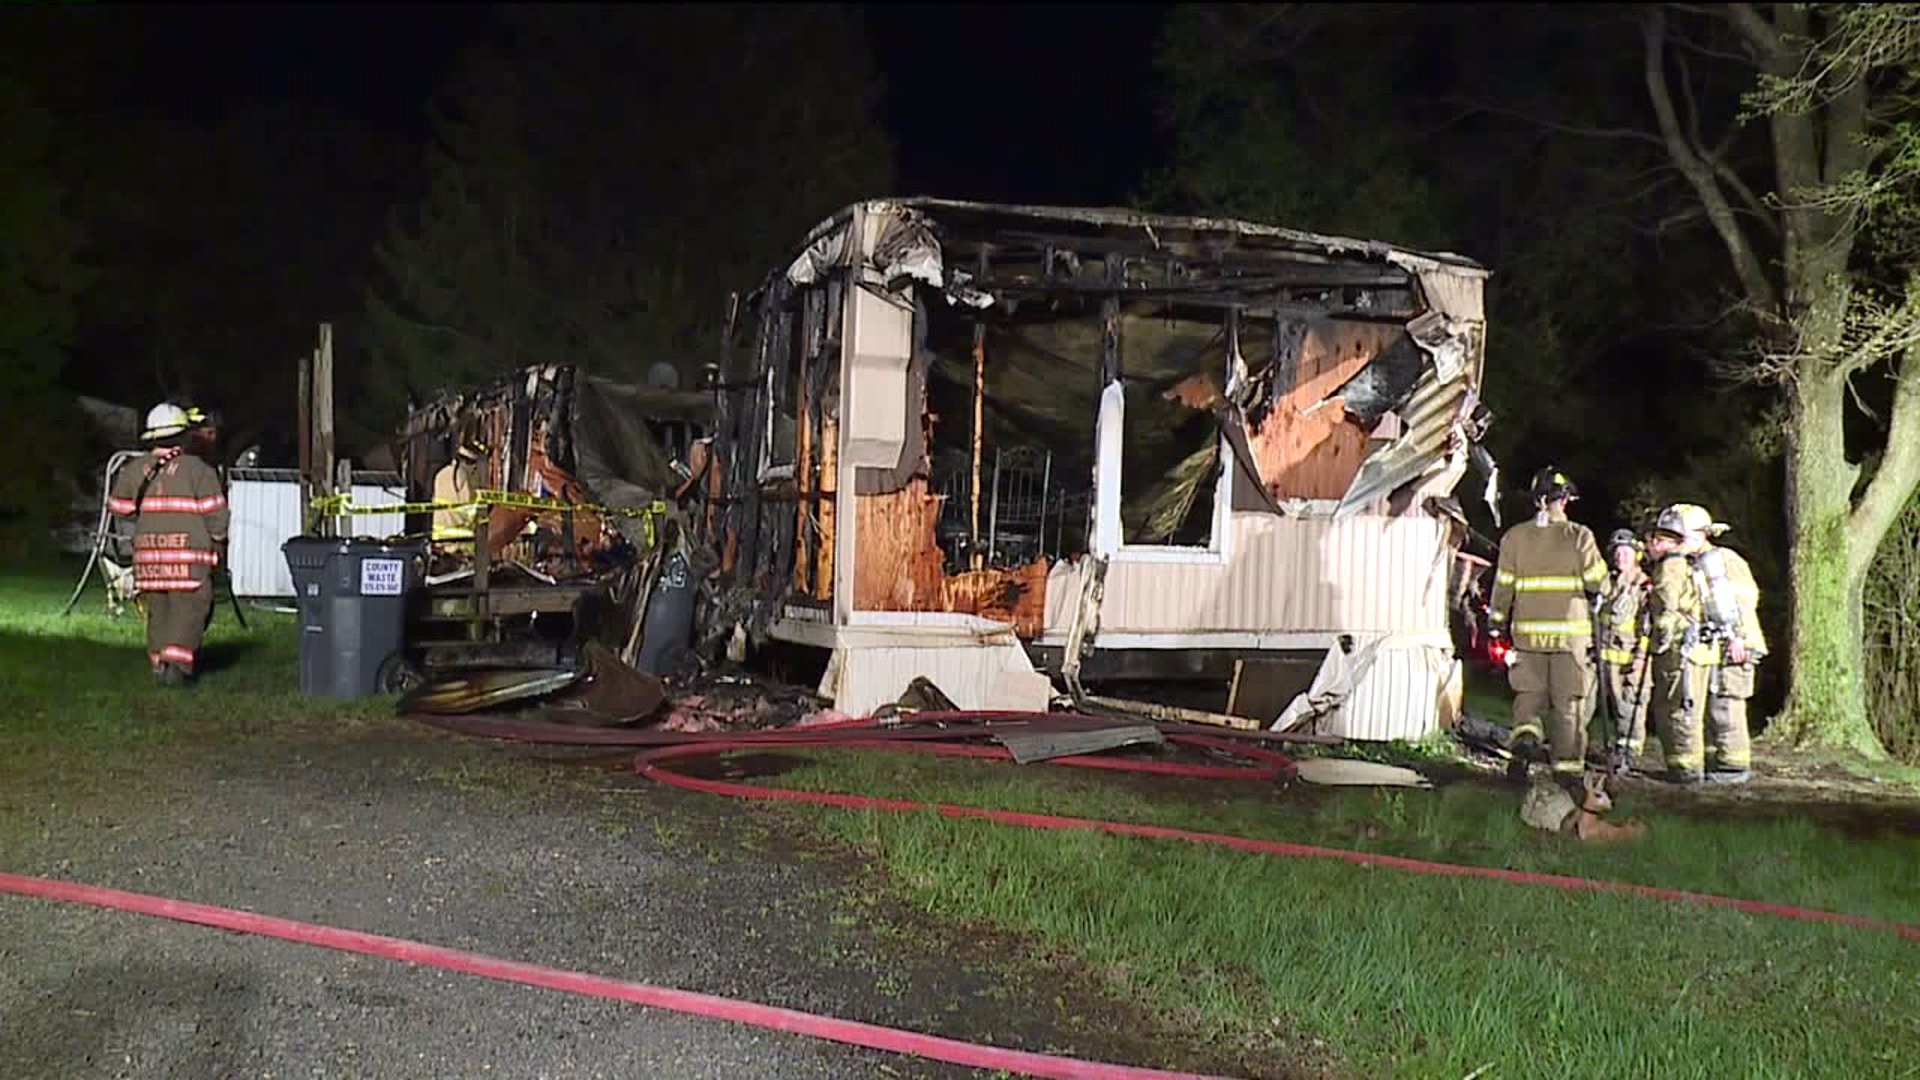 Mobile Home Destroyed by Flames